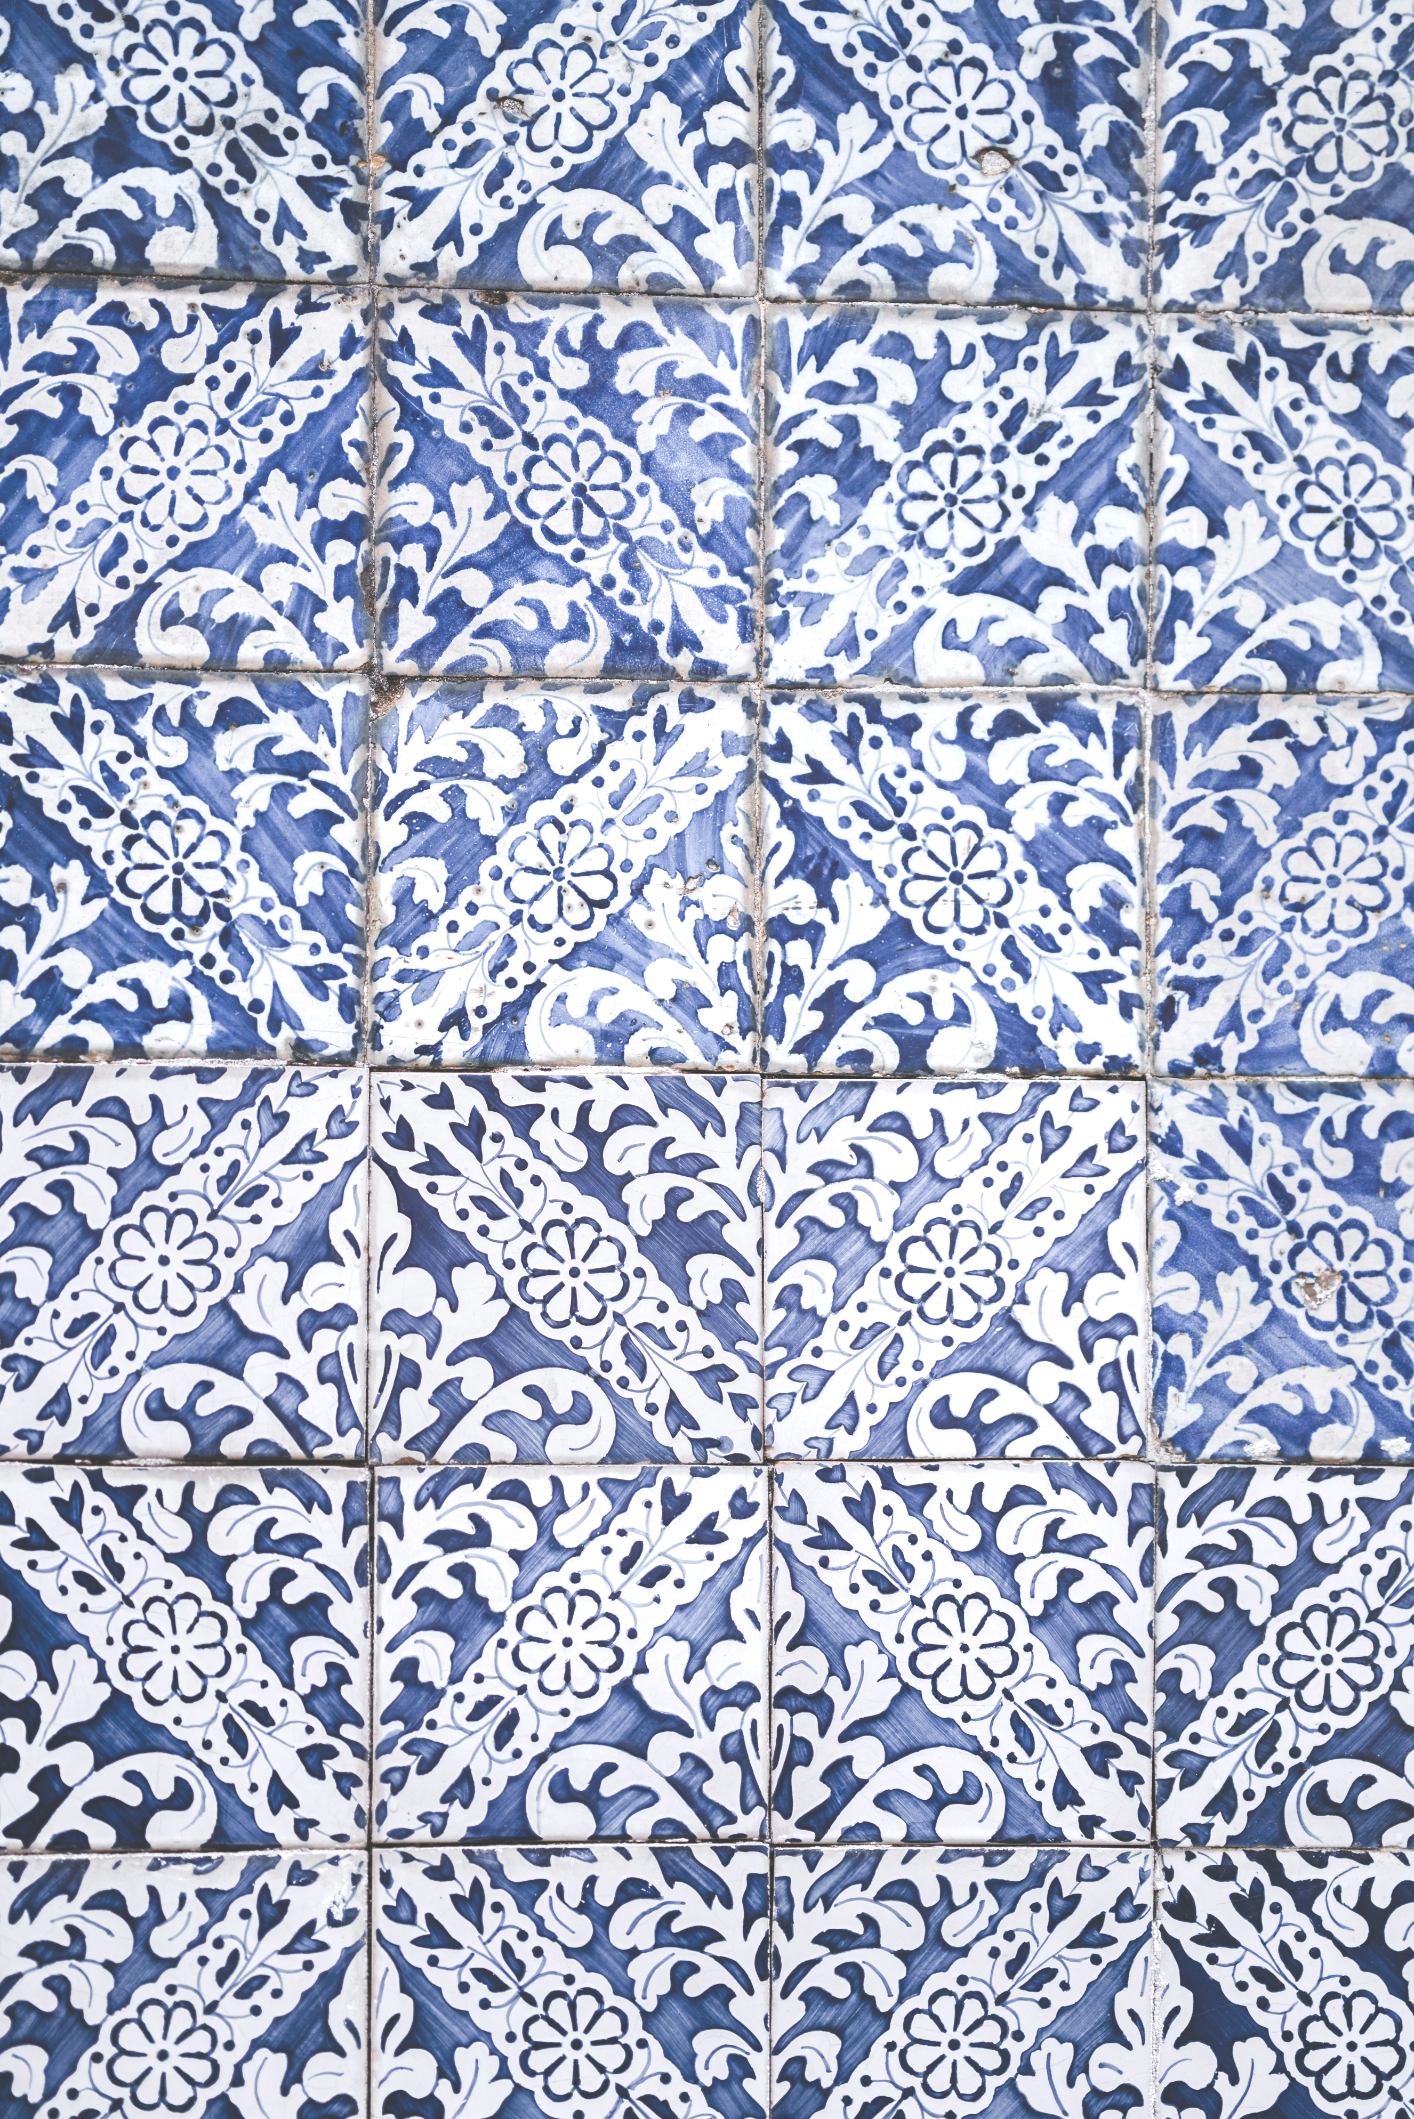 patterned blue and white tiles with cracking grout between them